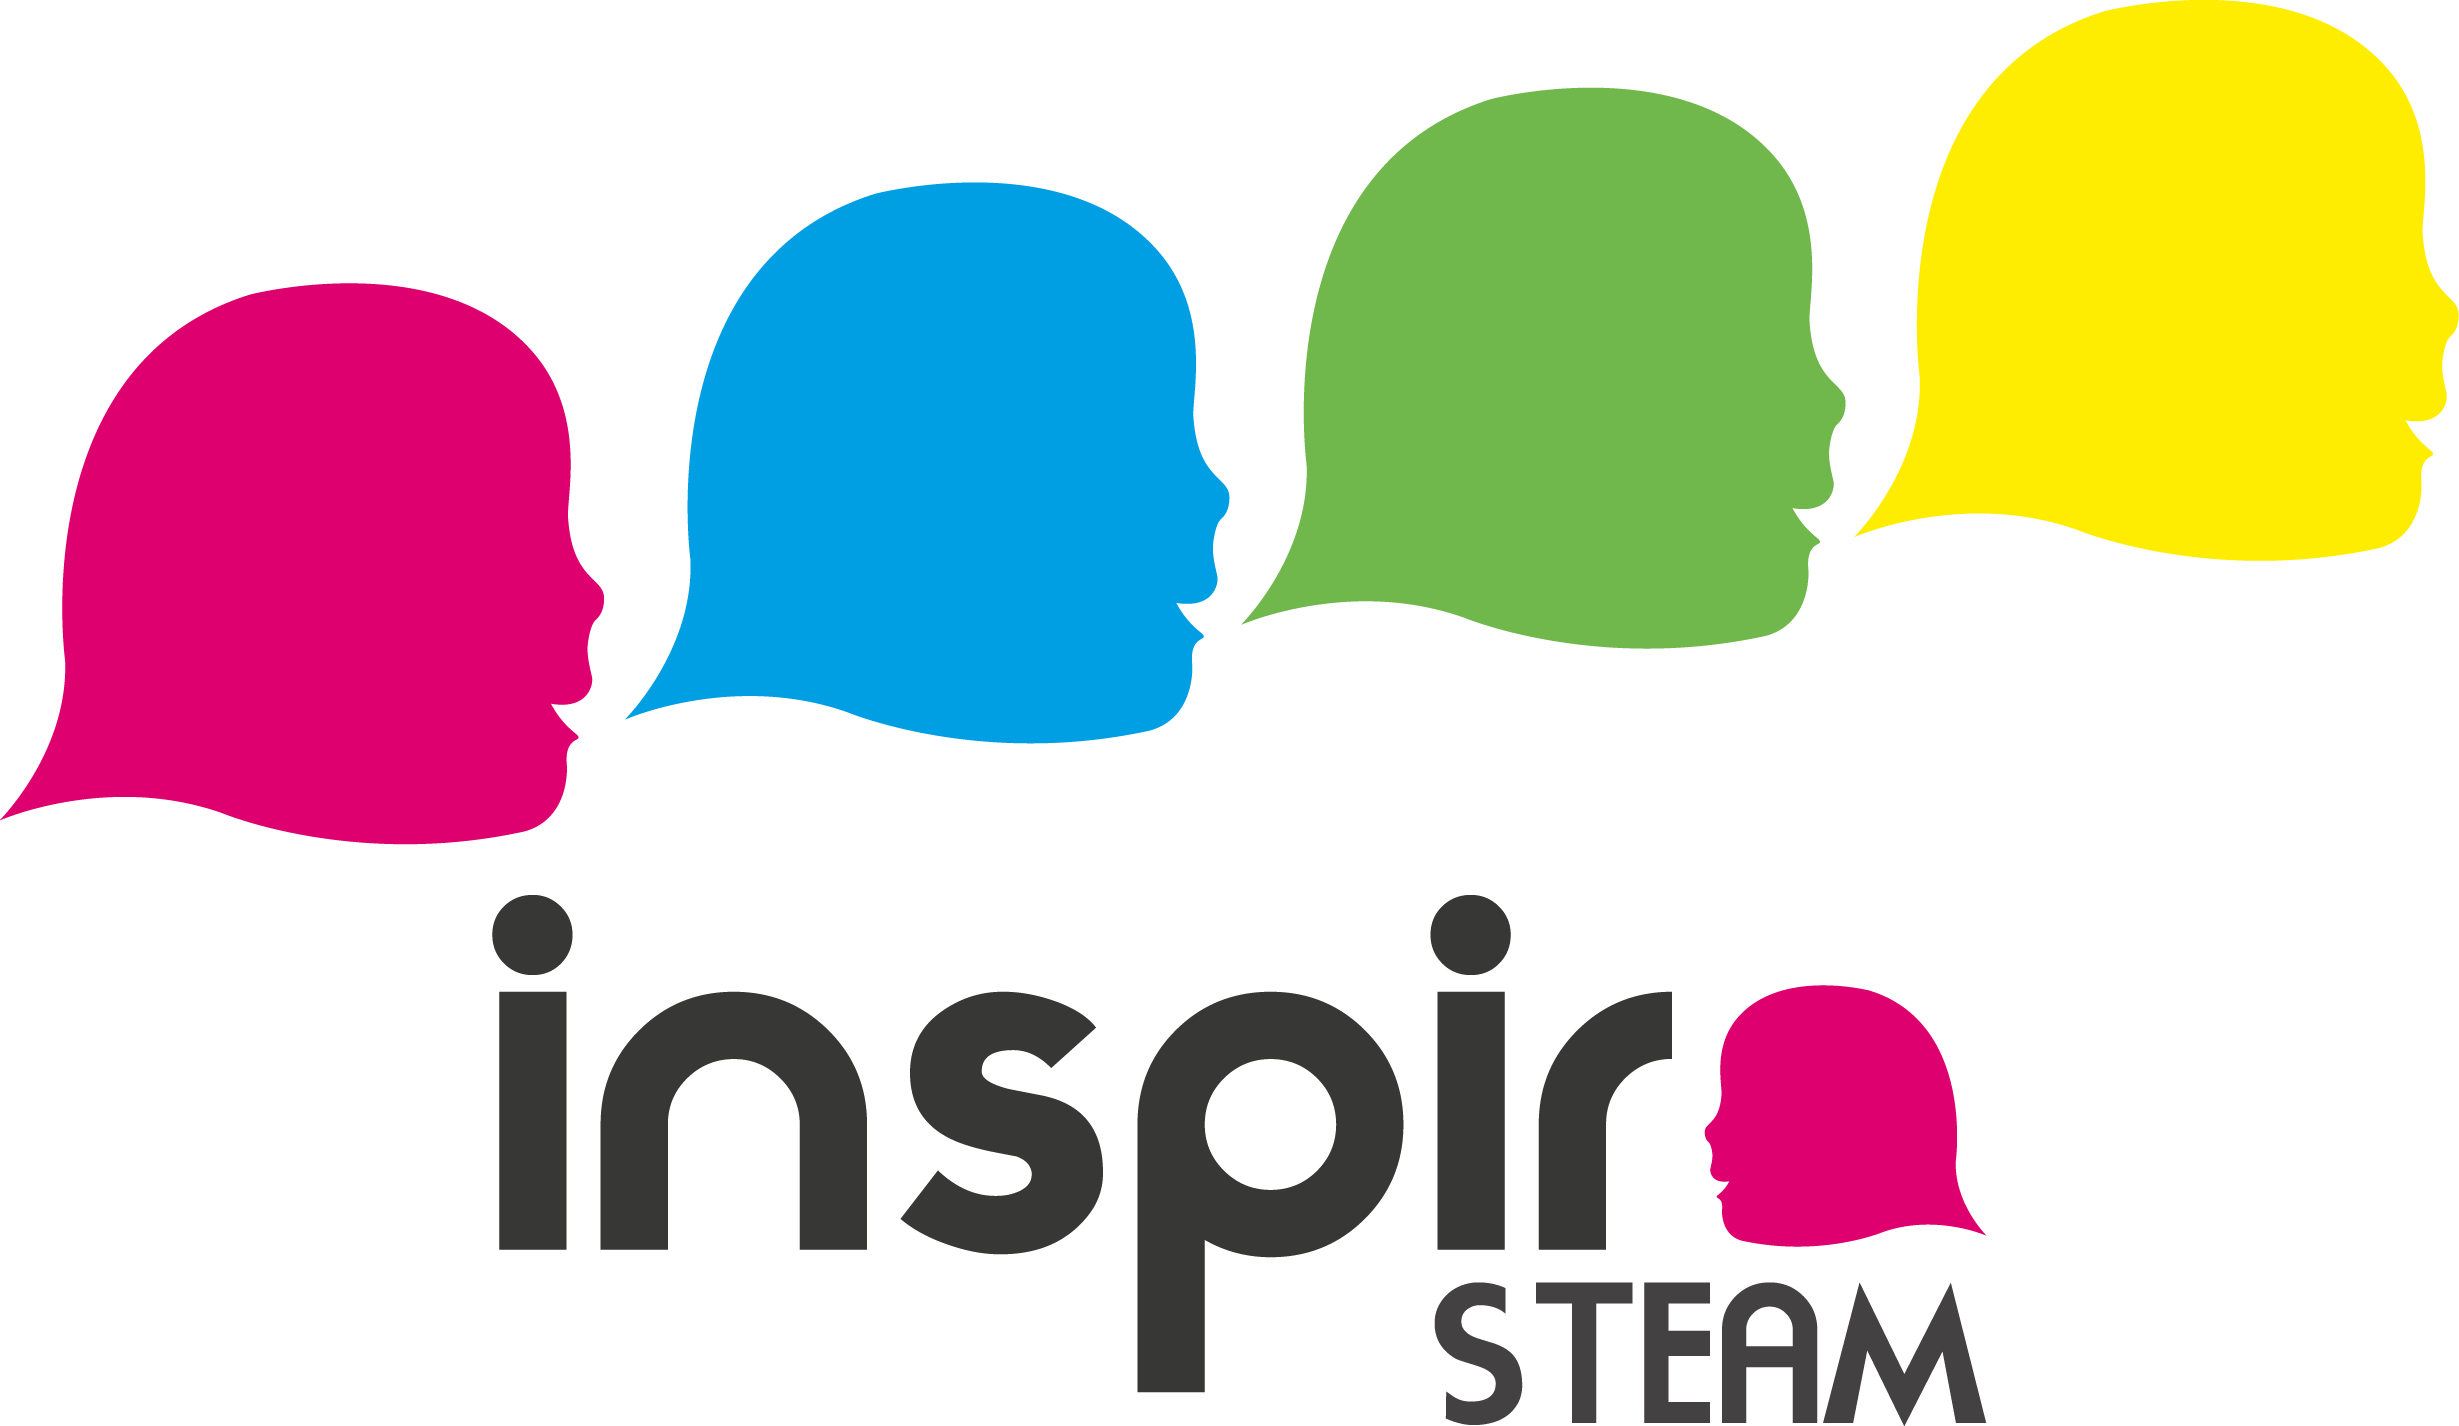 Inspira STEAM is a pioneering project for the promotion of the scientific-technological vocation among girls, based on awareness and orientation actions, taught by professional women from the world of research, science and technology.